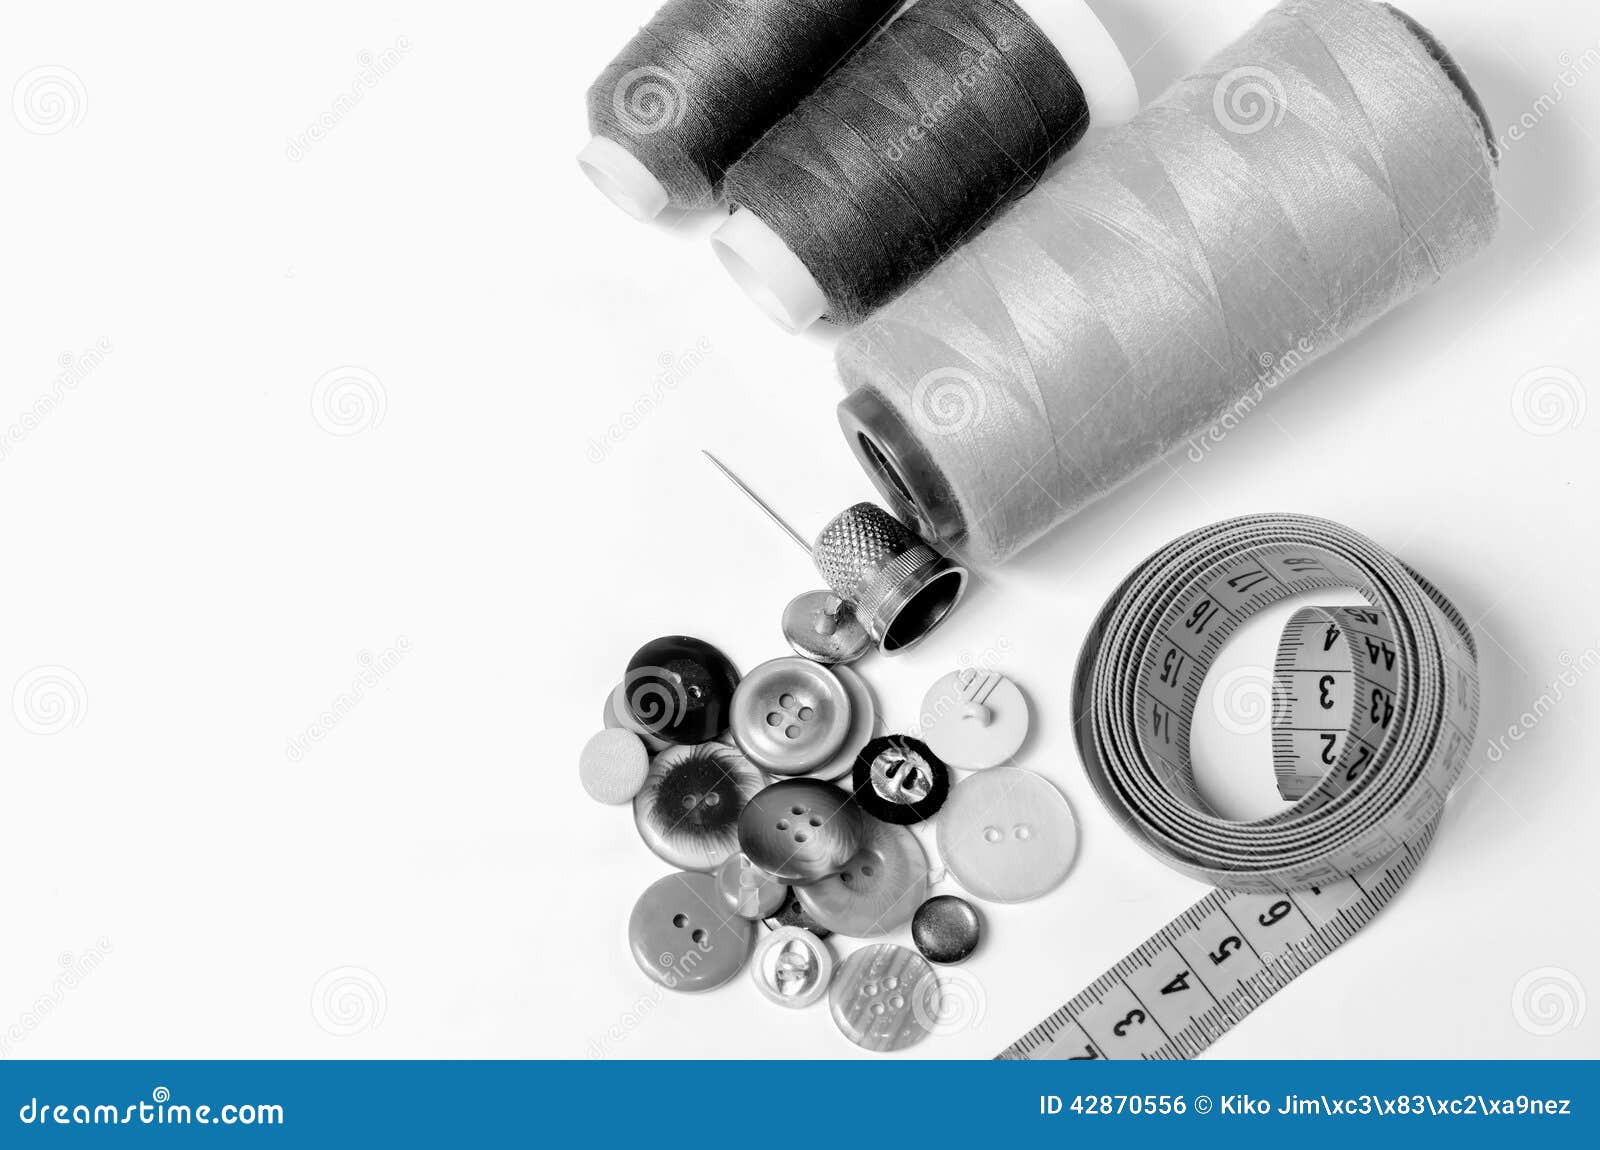 Sewing Utensils in Black and White Stock Photo - Image of embroidery ...